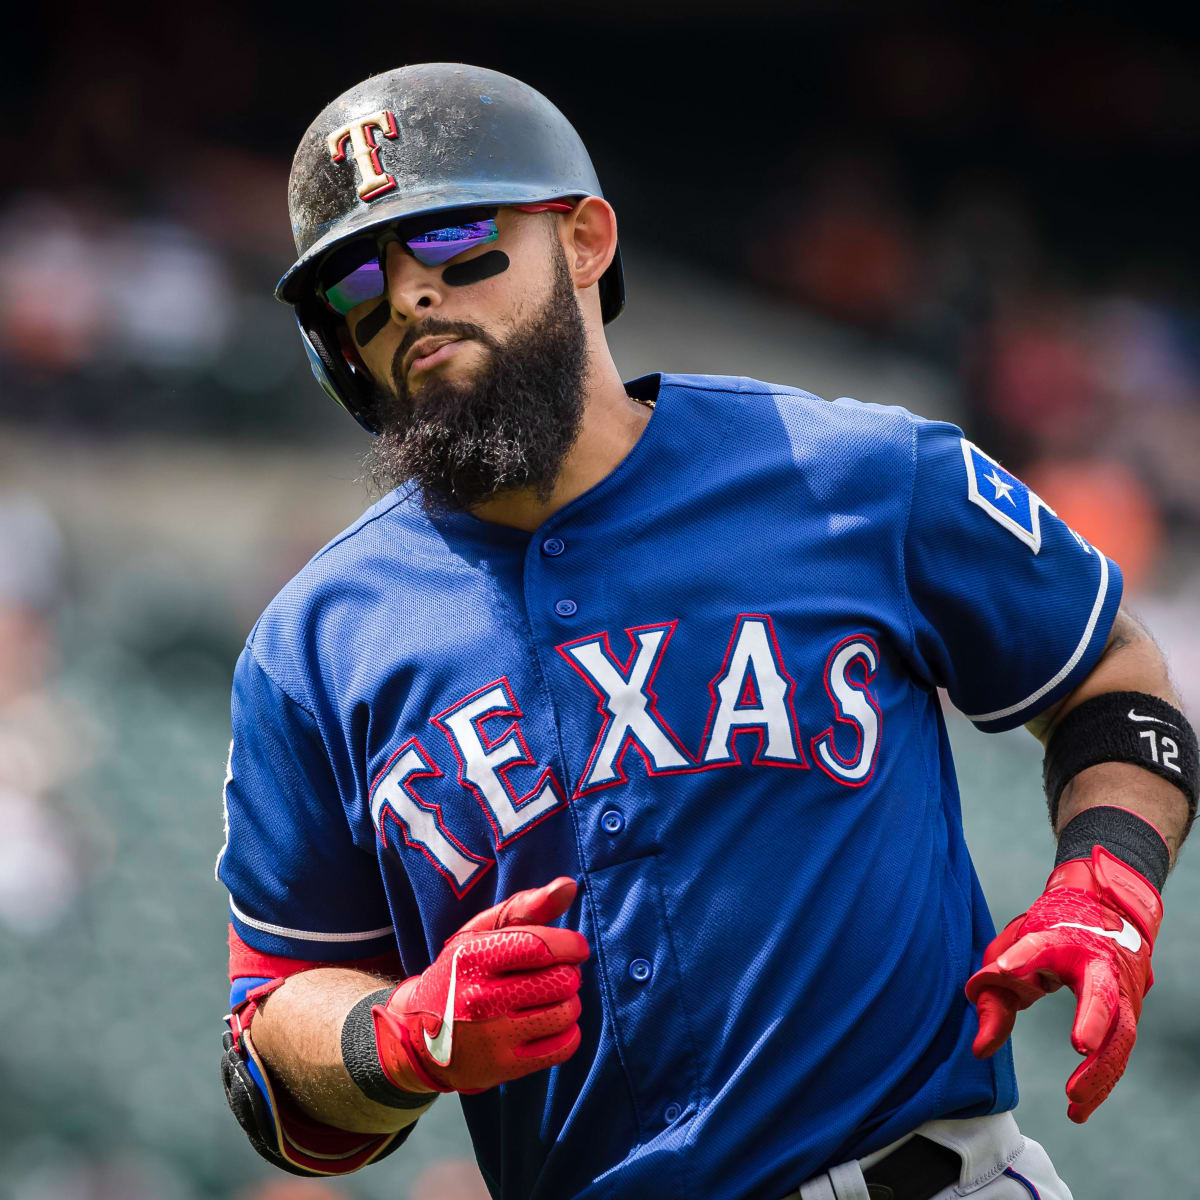 Texas Rangers: Can Rougned Odor recover from a horrendous 2017?